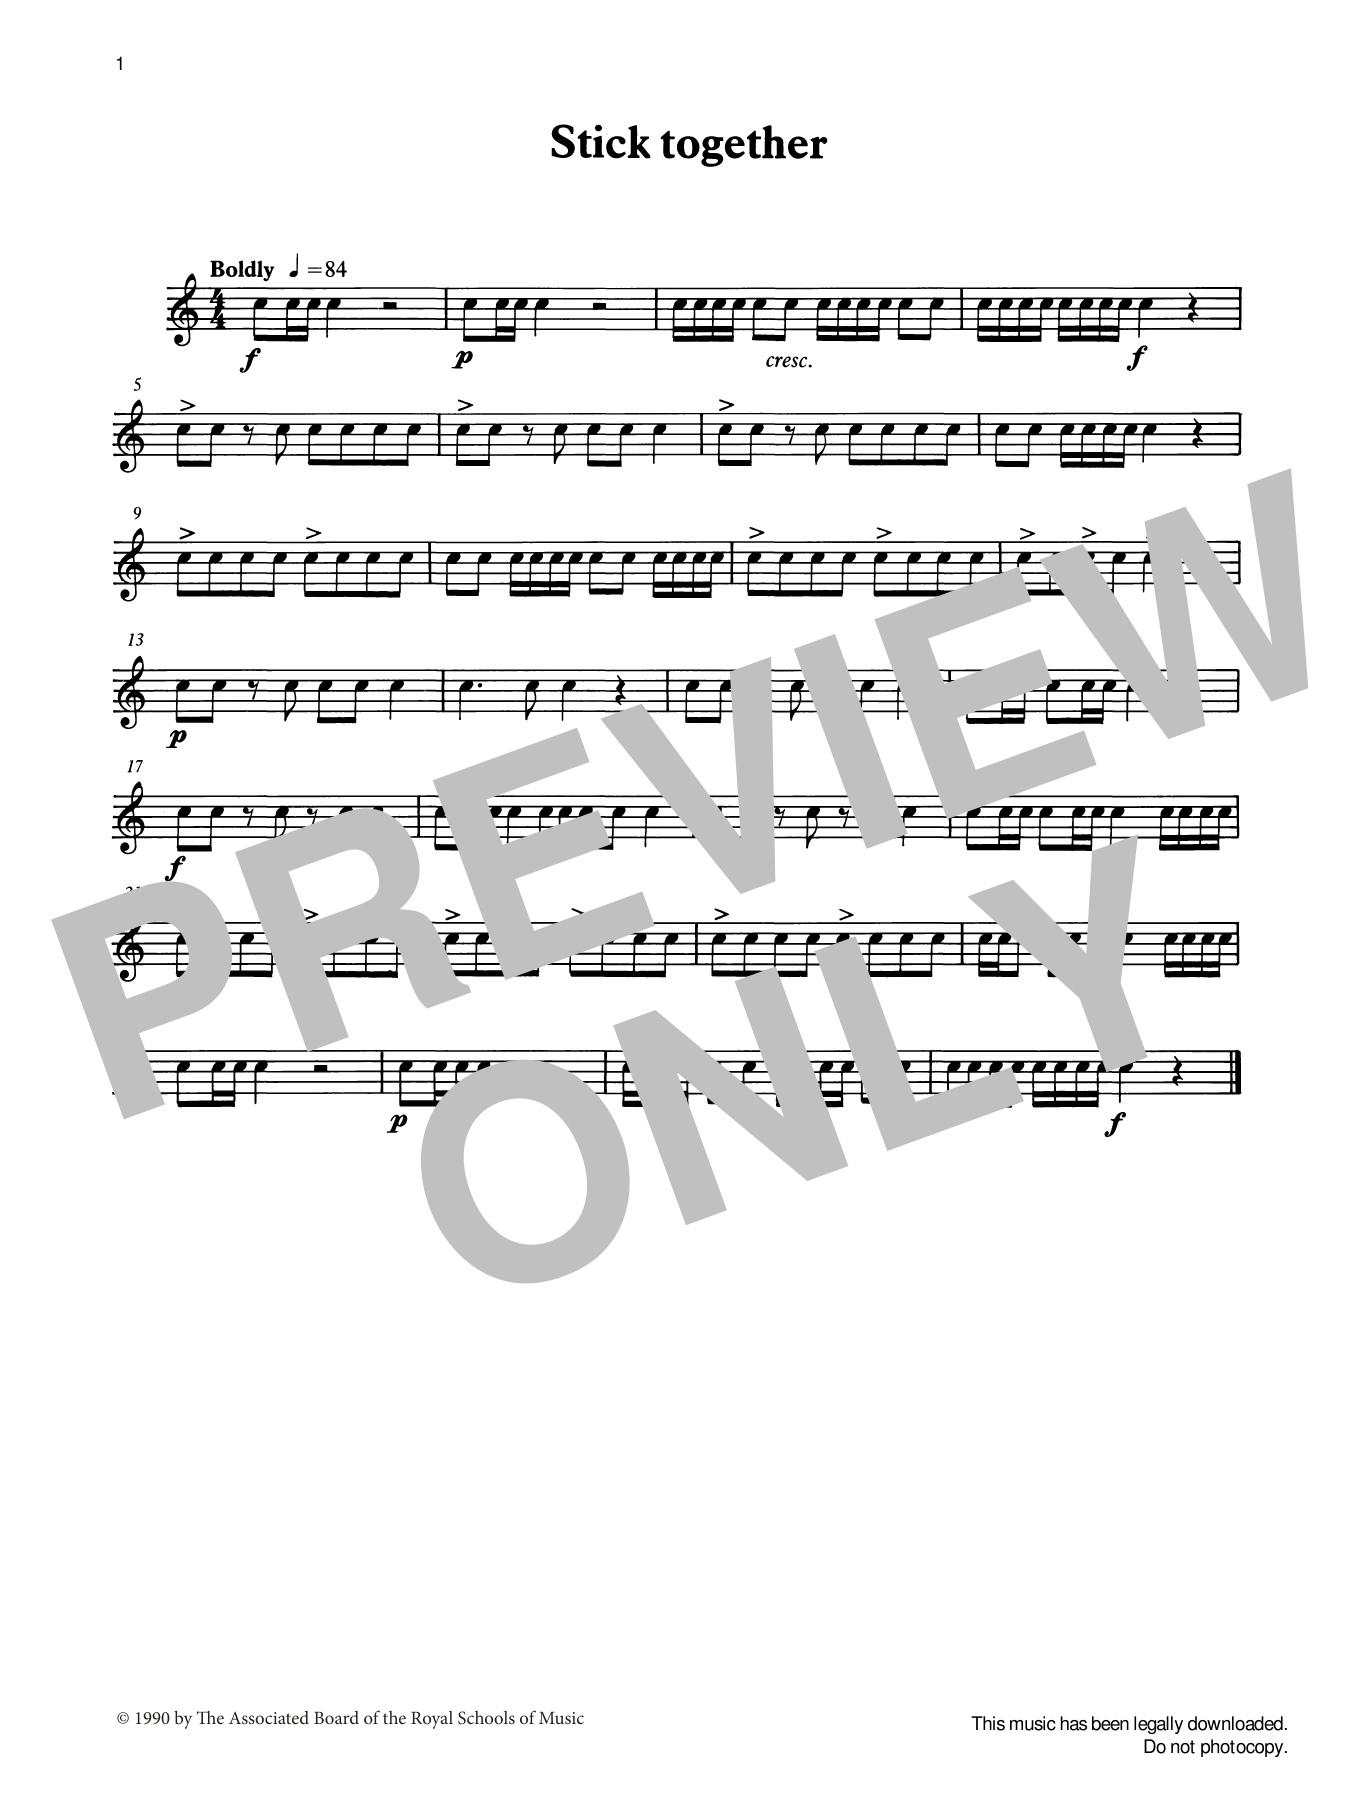 Stick Together from Graded Music for Snare Drum, Book I (Percussion Solo) von Ian Wright and Kevin Hathaway